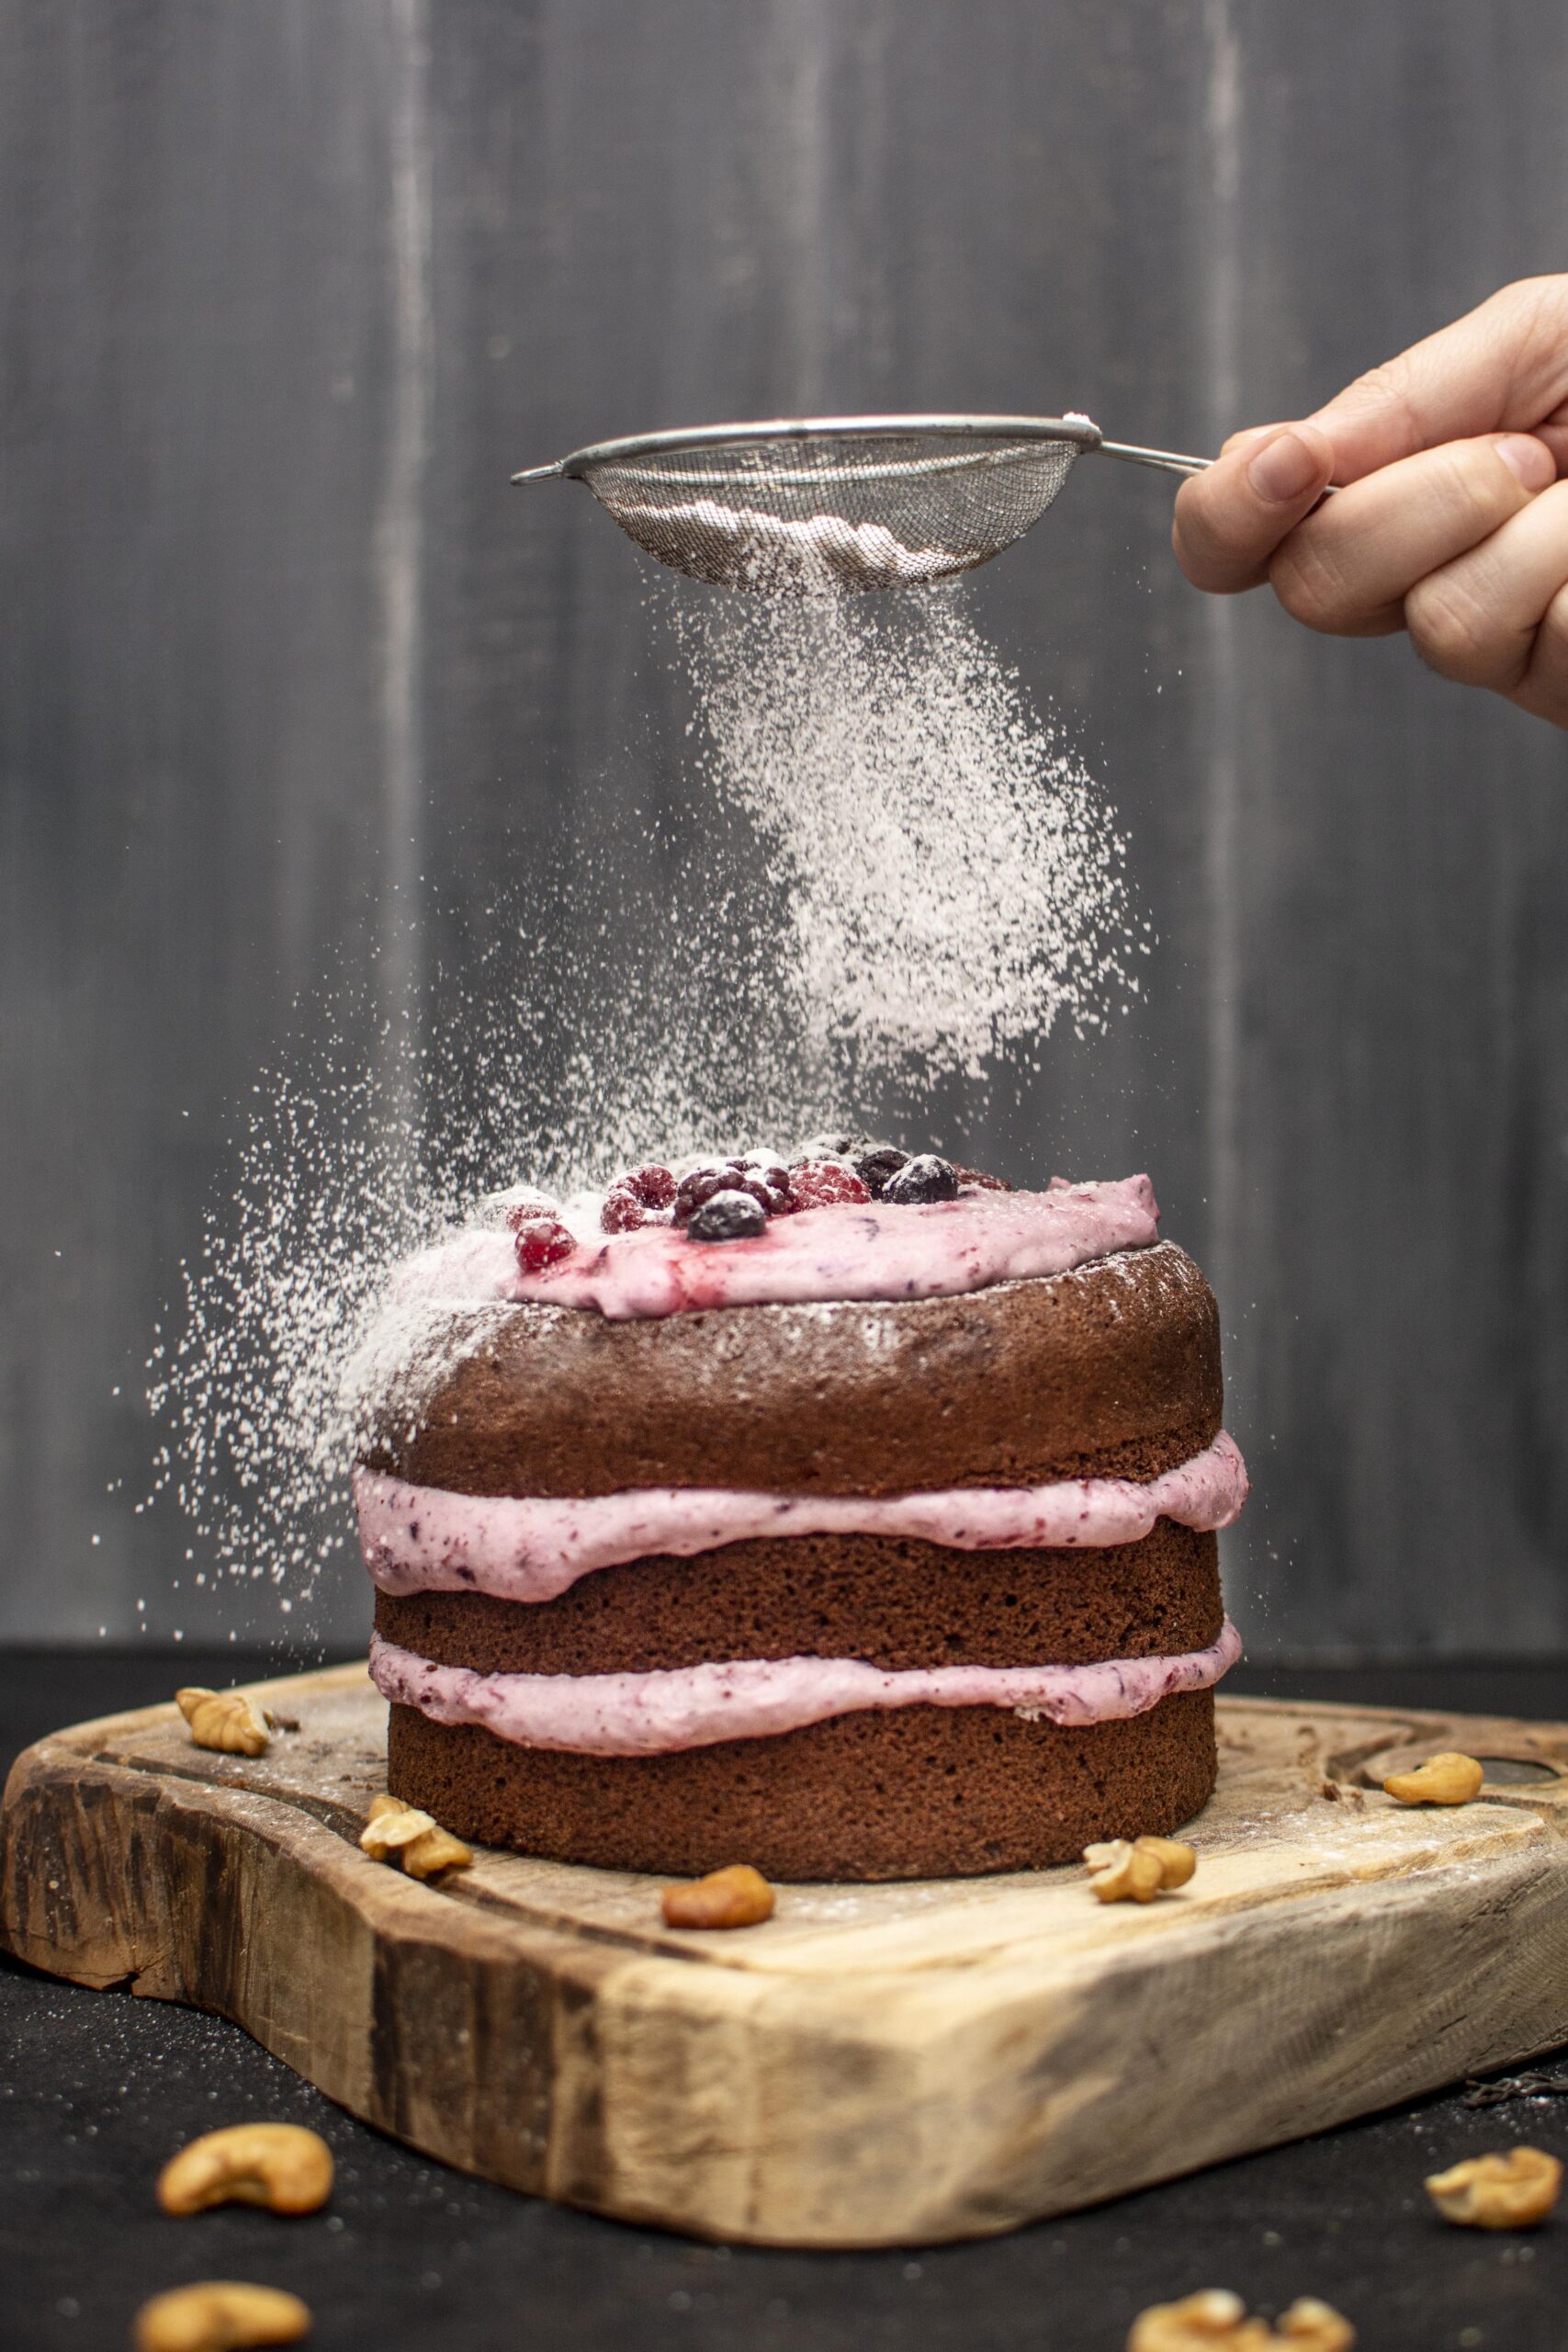 front-view-hand-sieving-powdered-sugar-top-hands